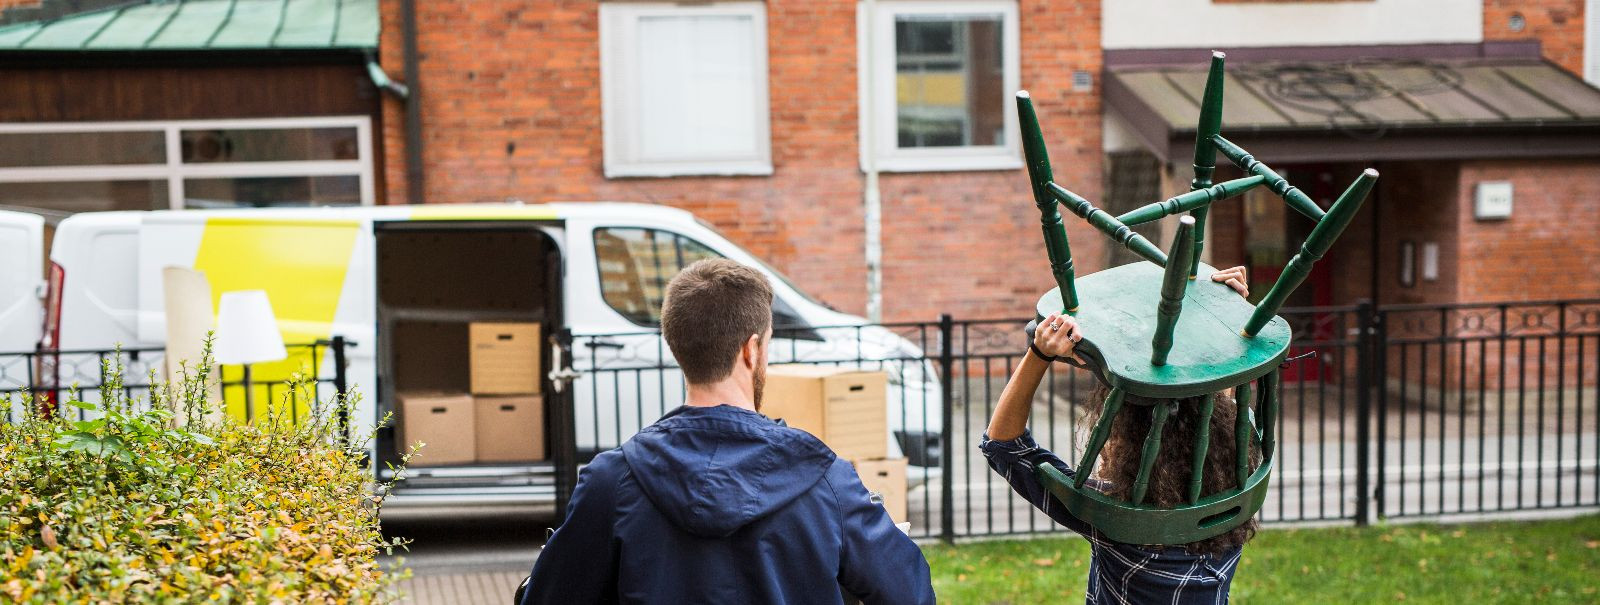 Before you begin your search for a transport service, it's crucial to understand the scope of your move. Are you relocating a one-bedroom apartment or a multi-s